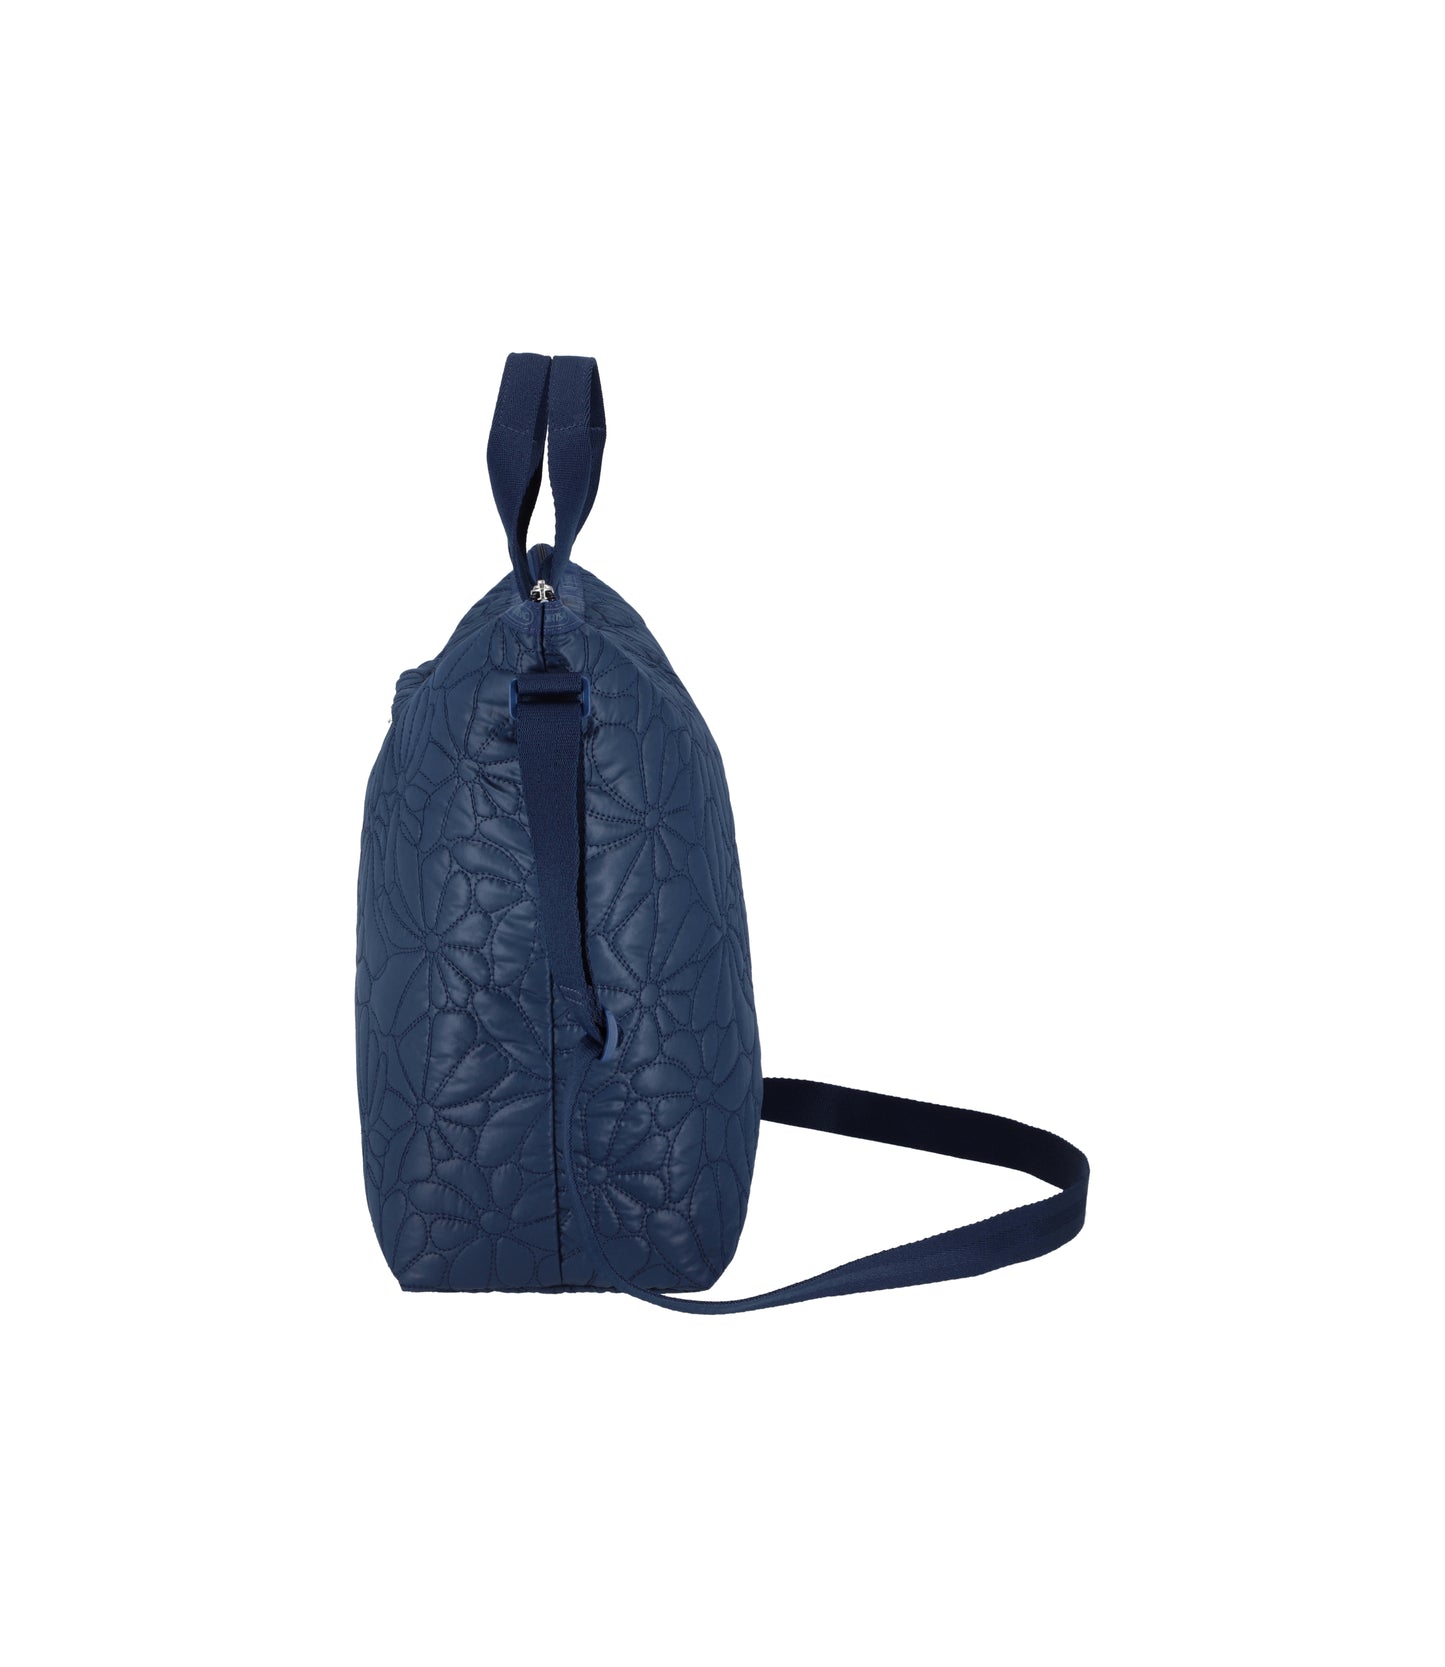 Deluxe Easy Carry Tote<br>Navy Quilted Blooms